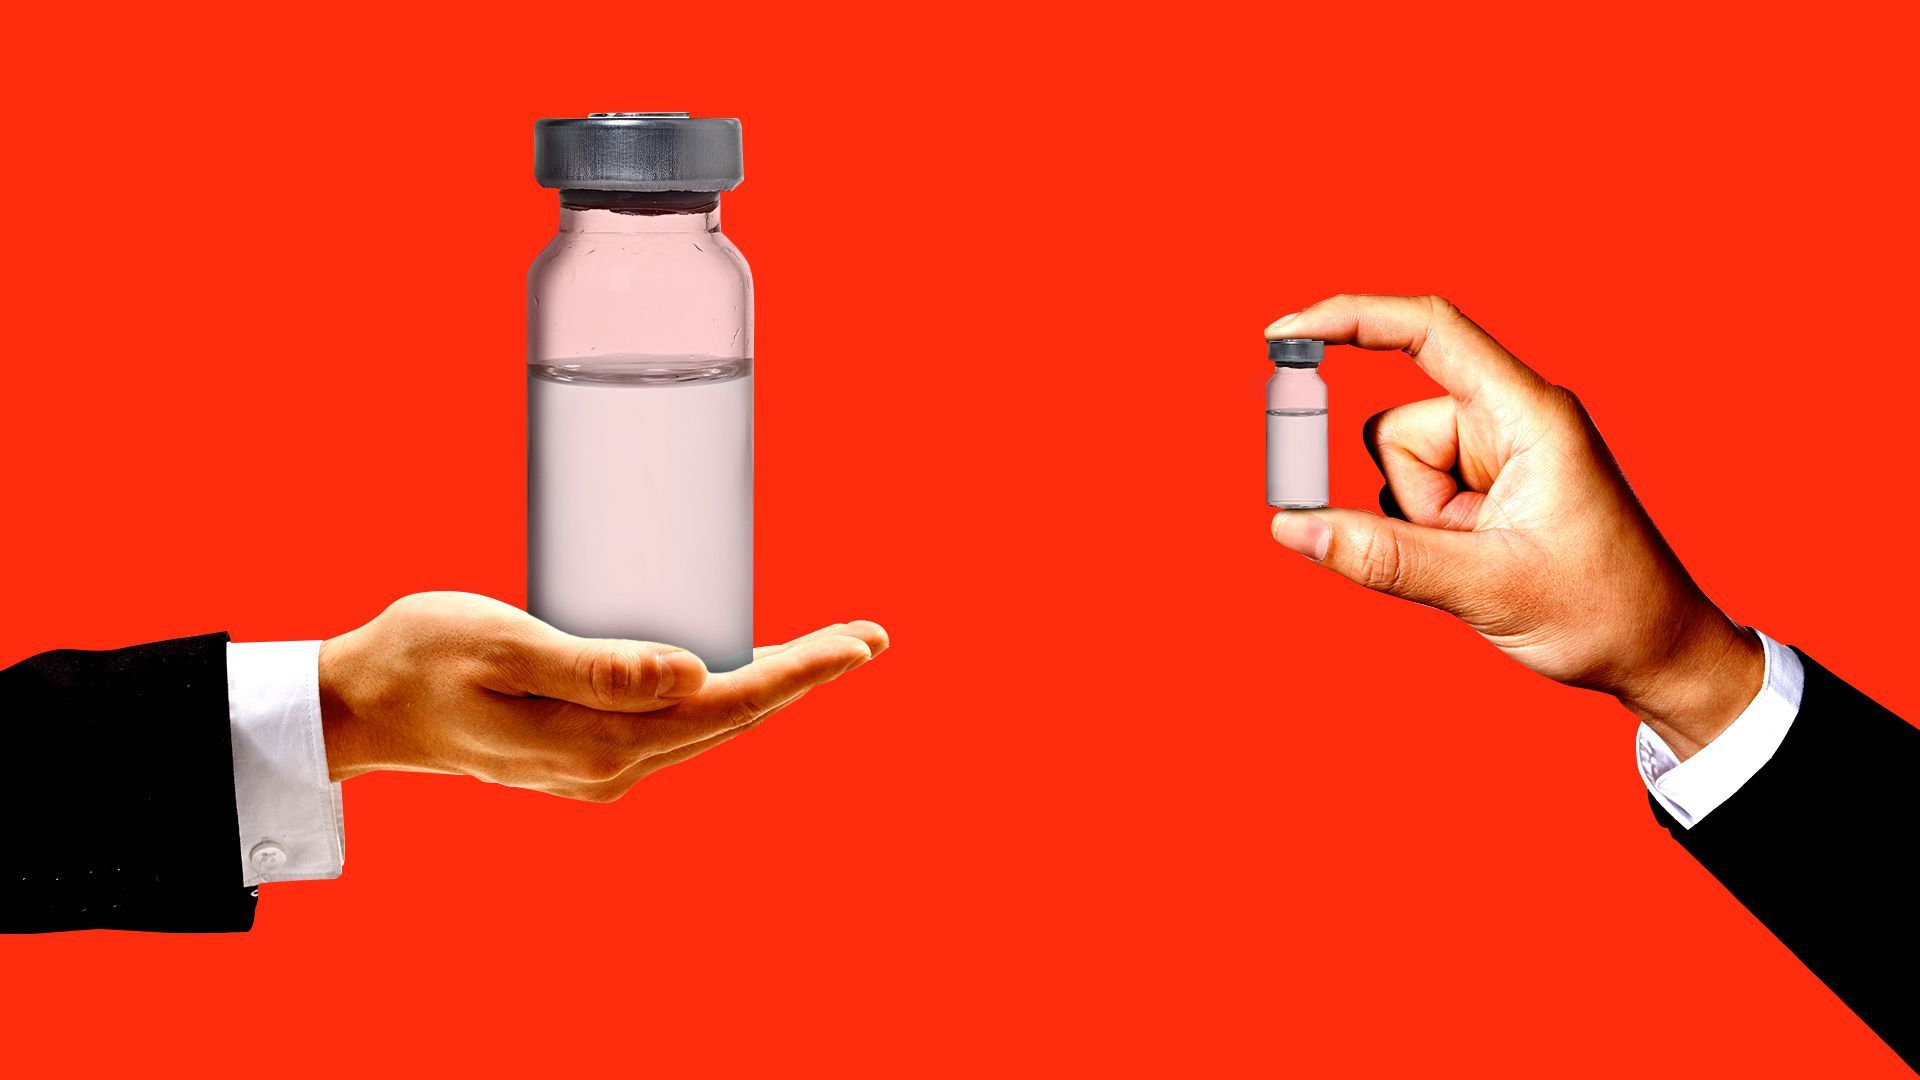 Illustration of one set of hands holding a giant vaccine bottle and another set of hands holding a smaller bottle.  